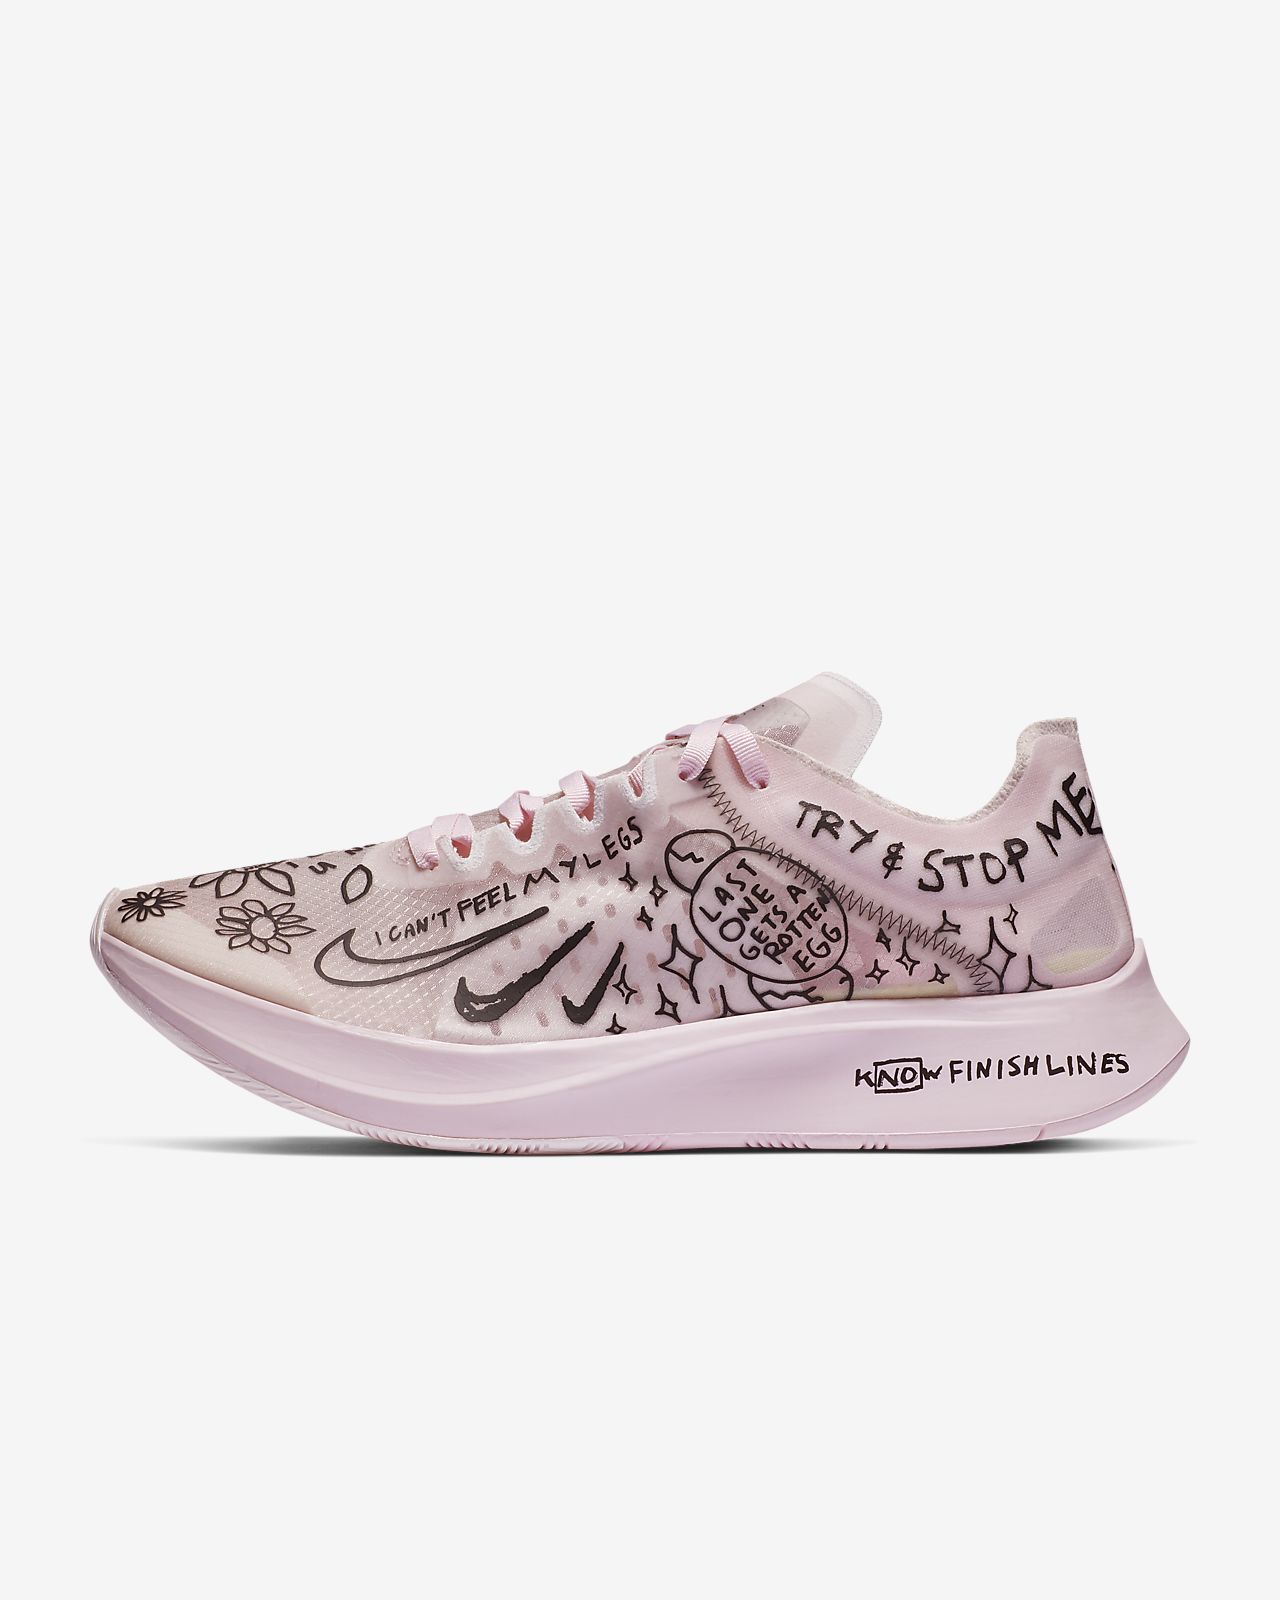 nike nathan bell zoom fly sp Online 